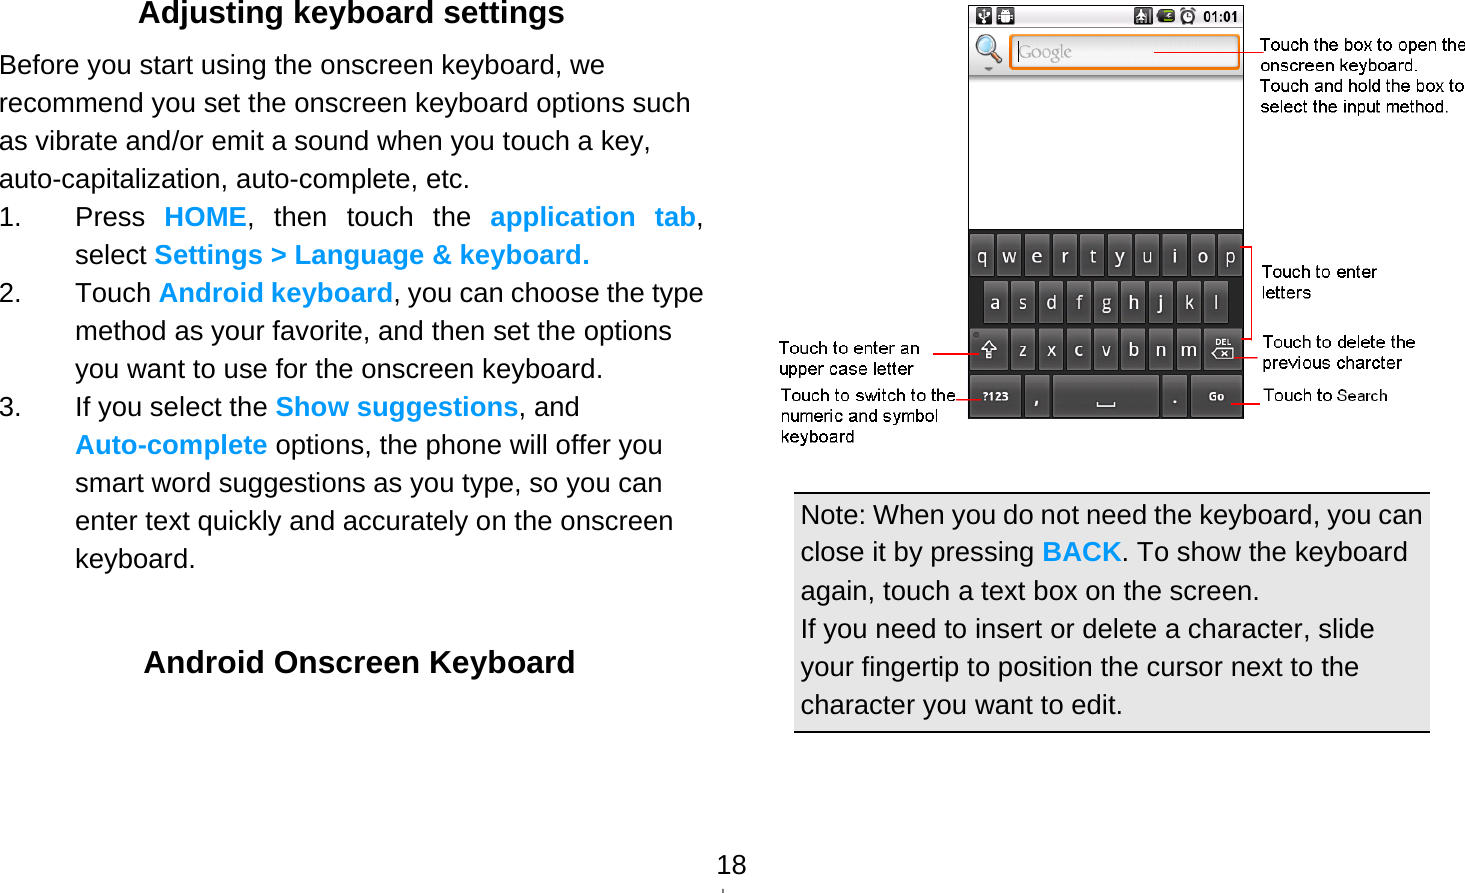   18Adjusting keyboard settings Before you start using the onscreen keyboard, we recommend you set the onscreen keyboard options such as vibrate and/or emit a sound when you touch a key, auto-capitalization, auto-complete, etc. 1. Press HOME, then touch the application tab, select Settings &gt; Language &amp; keyboard. 2. Touch Android keyboard, you can choose the type method as your favorite, and then set the options you want to use for the onscreen keyboard. 3.  If you select the Show suggestions, and Auto-complete options, the phone will offer you smart word suggestions as you type, so you can enter text quickly and accurately on the onscreen keyboard.    Android Onscreen Keyboard   Note: When you do not need the keyboard, you can close it by pressing BACK. To show the keyboard again, touch a text box on the screen. If you need to insert or delete a character, slide your fingertip to position the cursor next to the character you want to edit. 